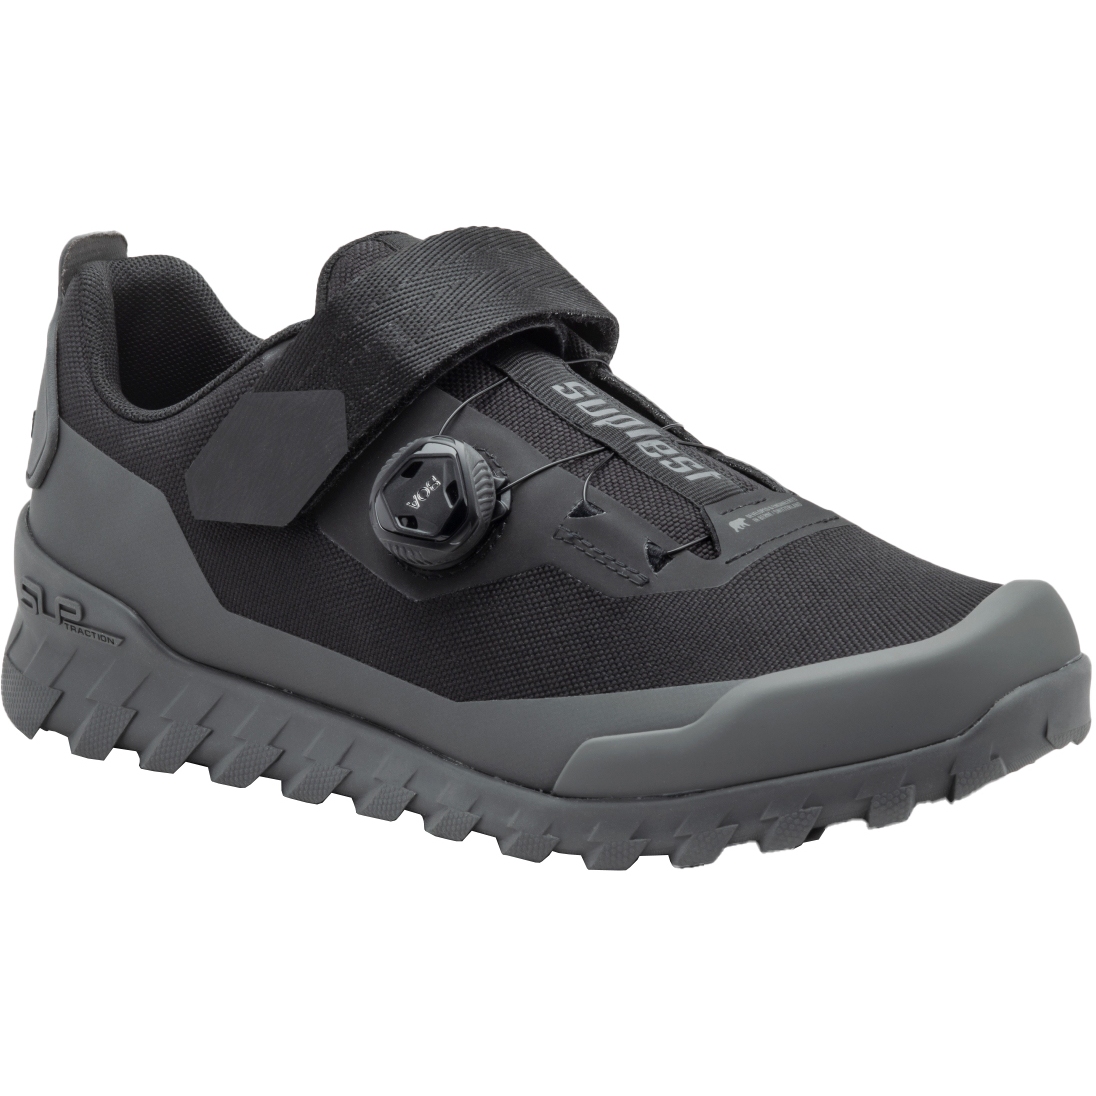 Picture of Suplest Offroad Trail Performance MTB Shoes - black/grey 03.051.